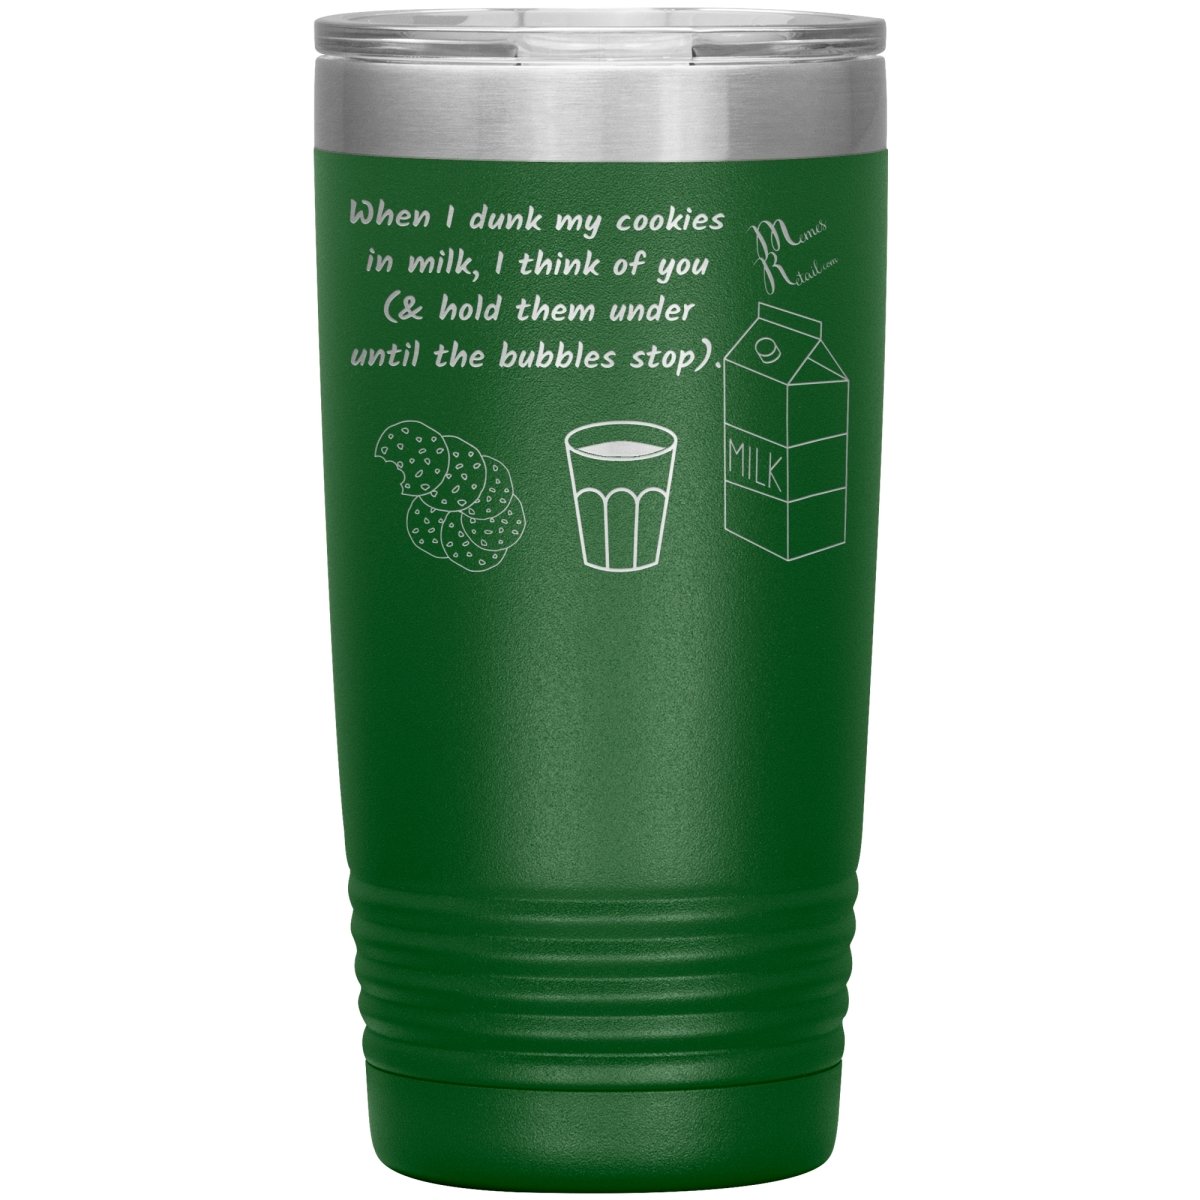 When I dunk My Cookies in Milk, I think of You - Tumblers, 20oz Insulated Tumbler / Green - MemesRetail.com